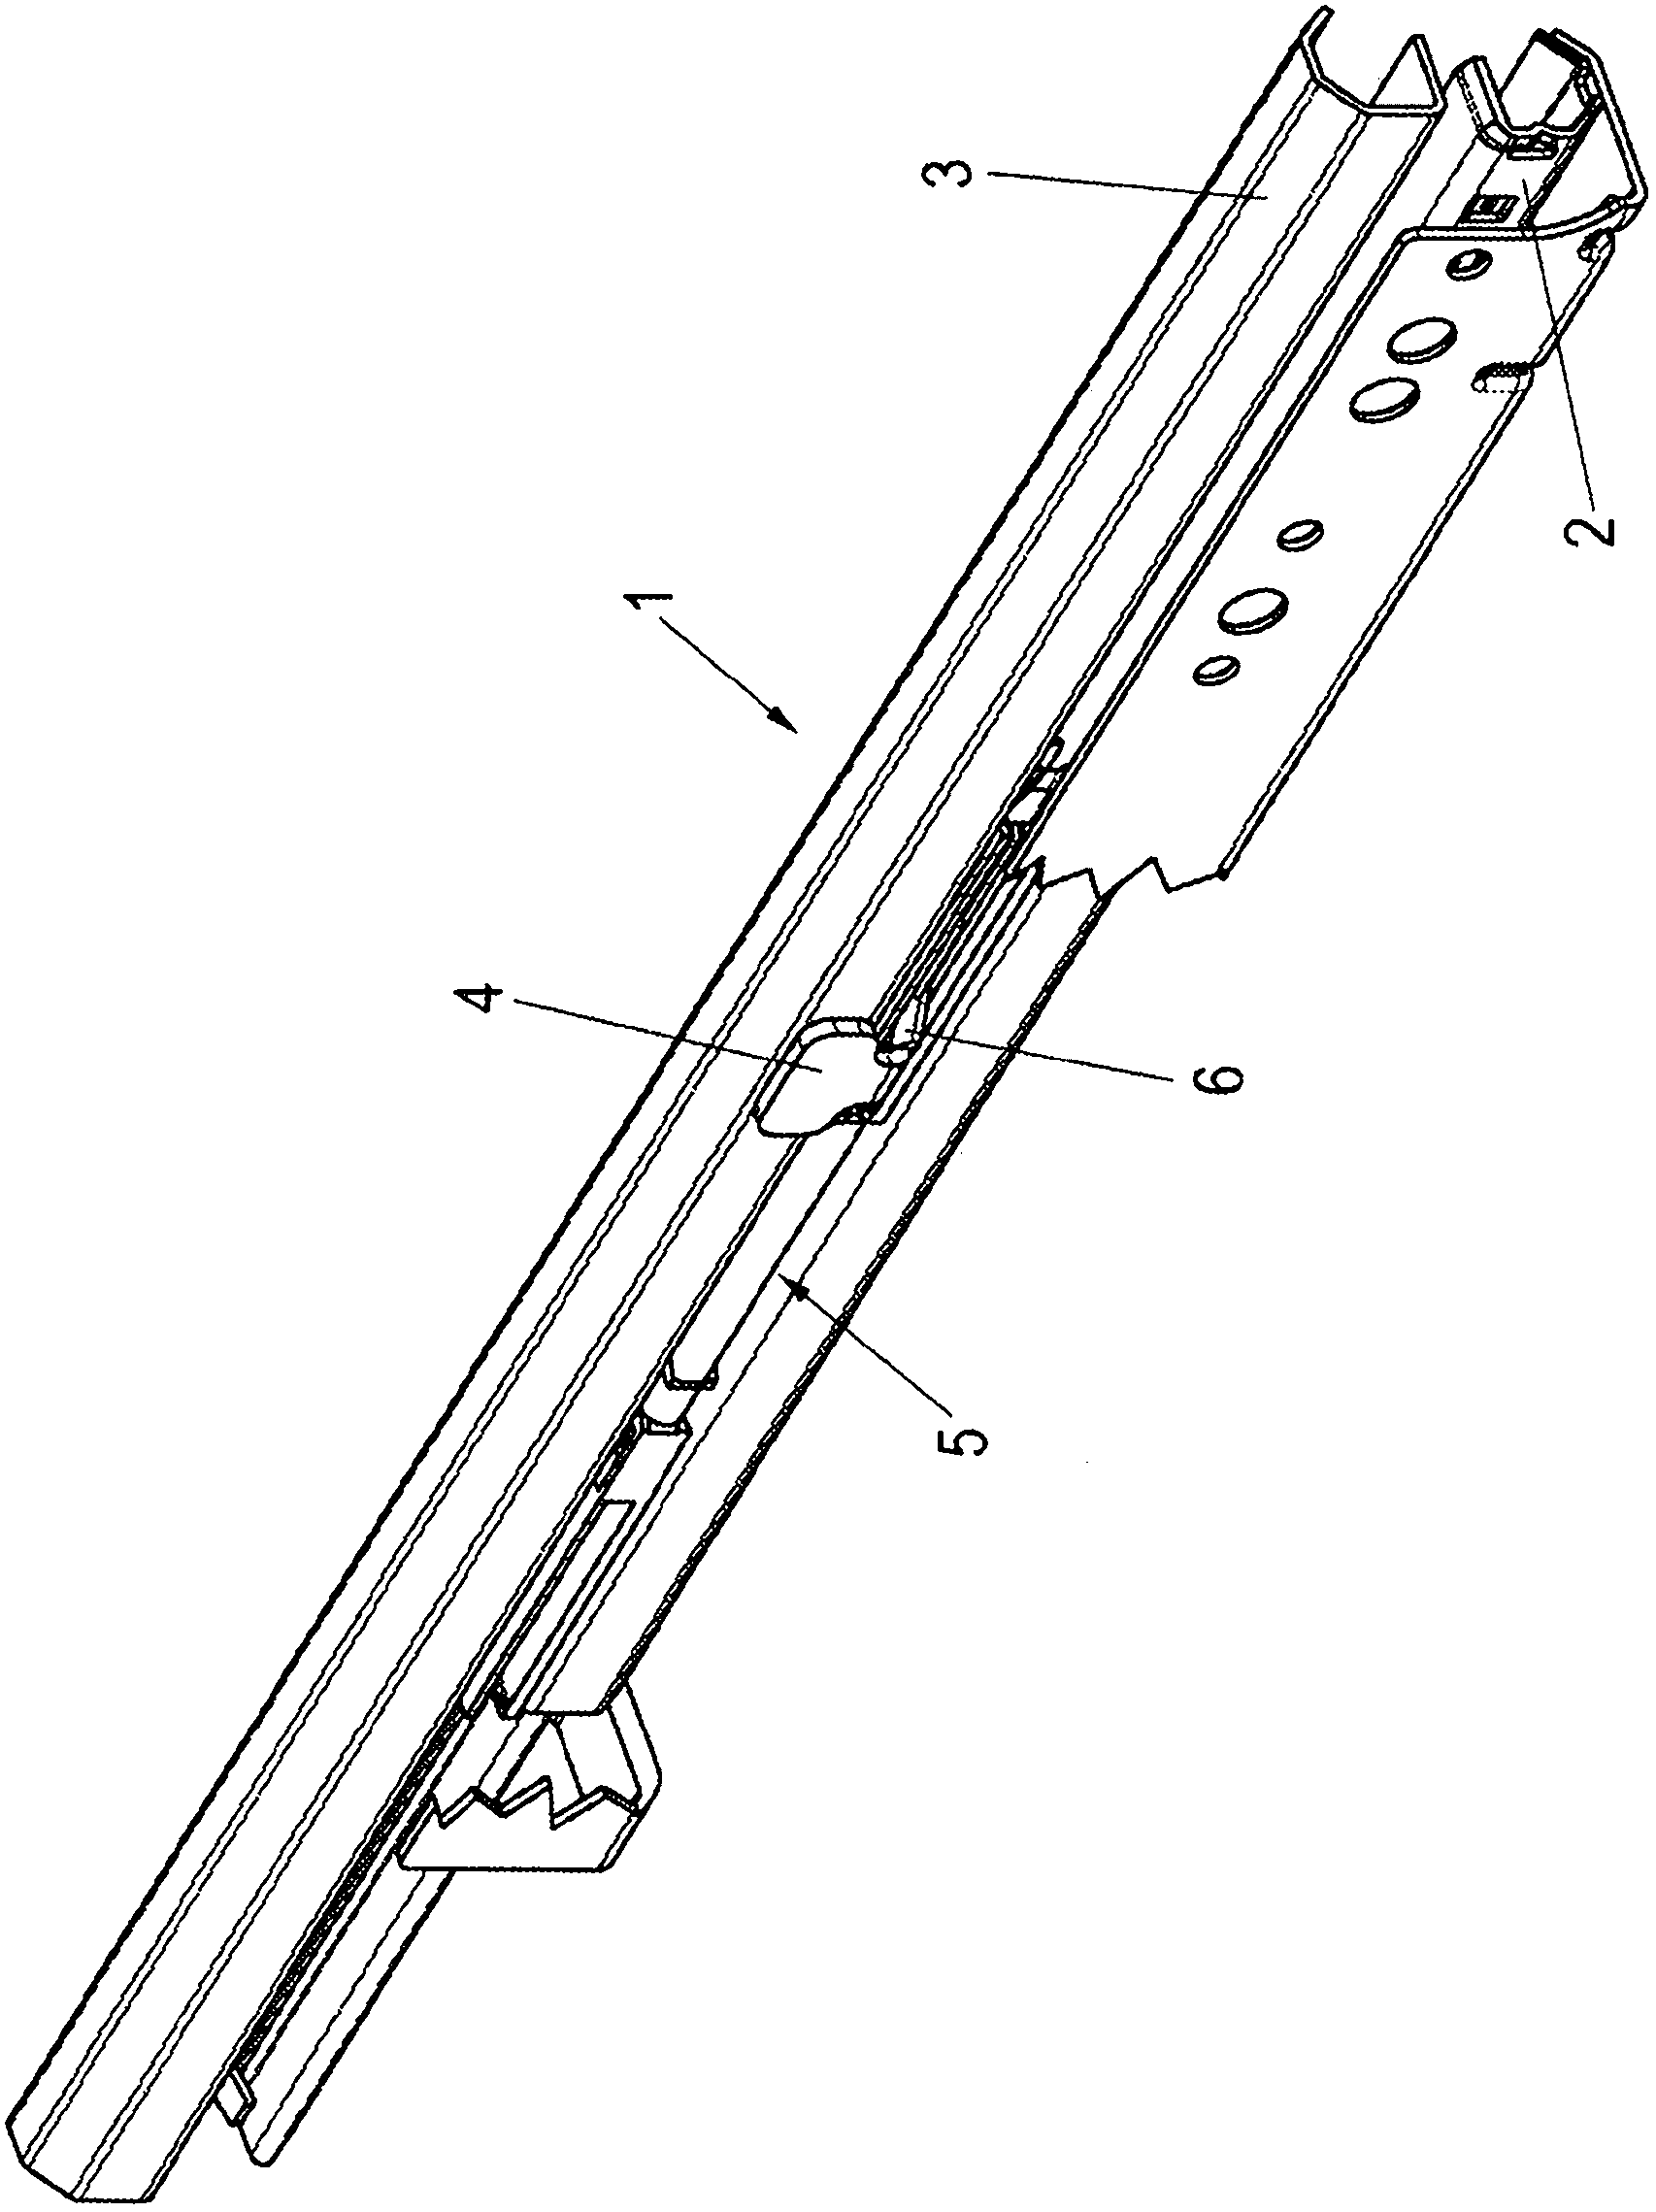 Self-retracting device and drawer slide